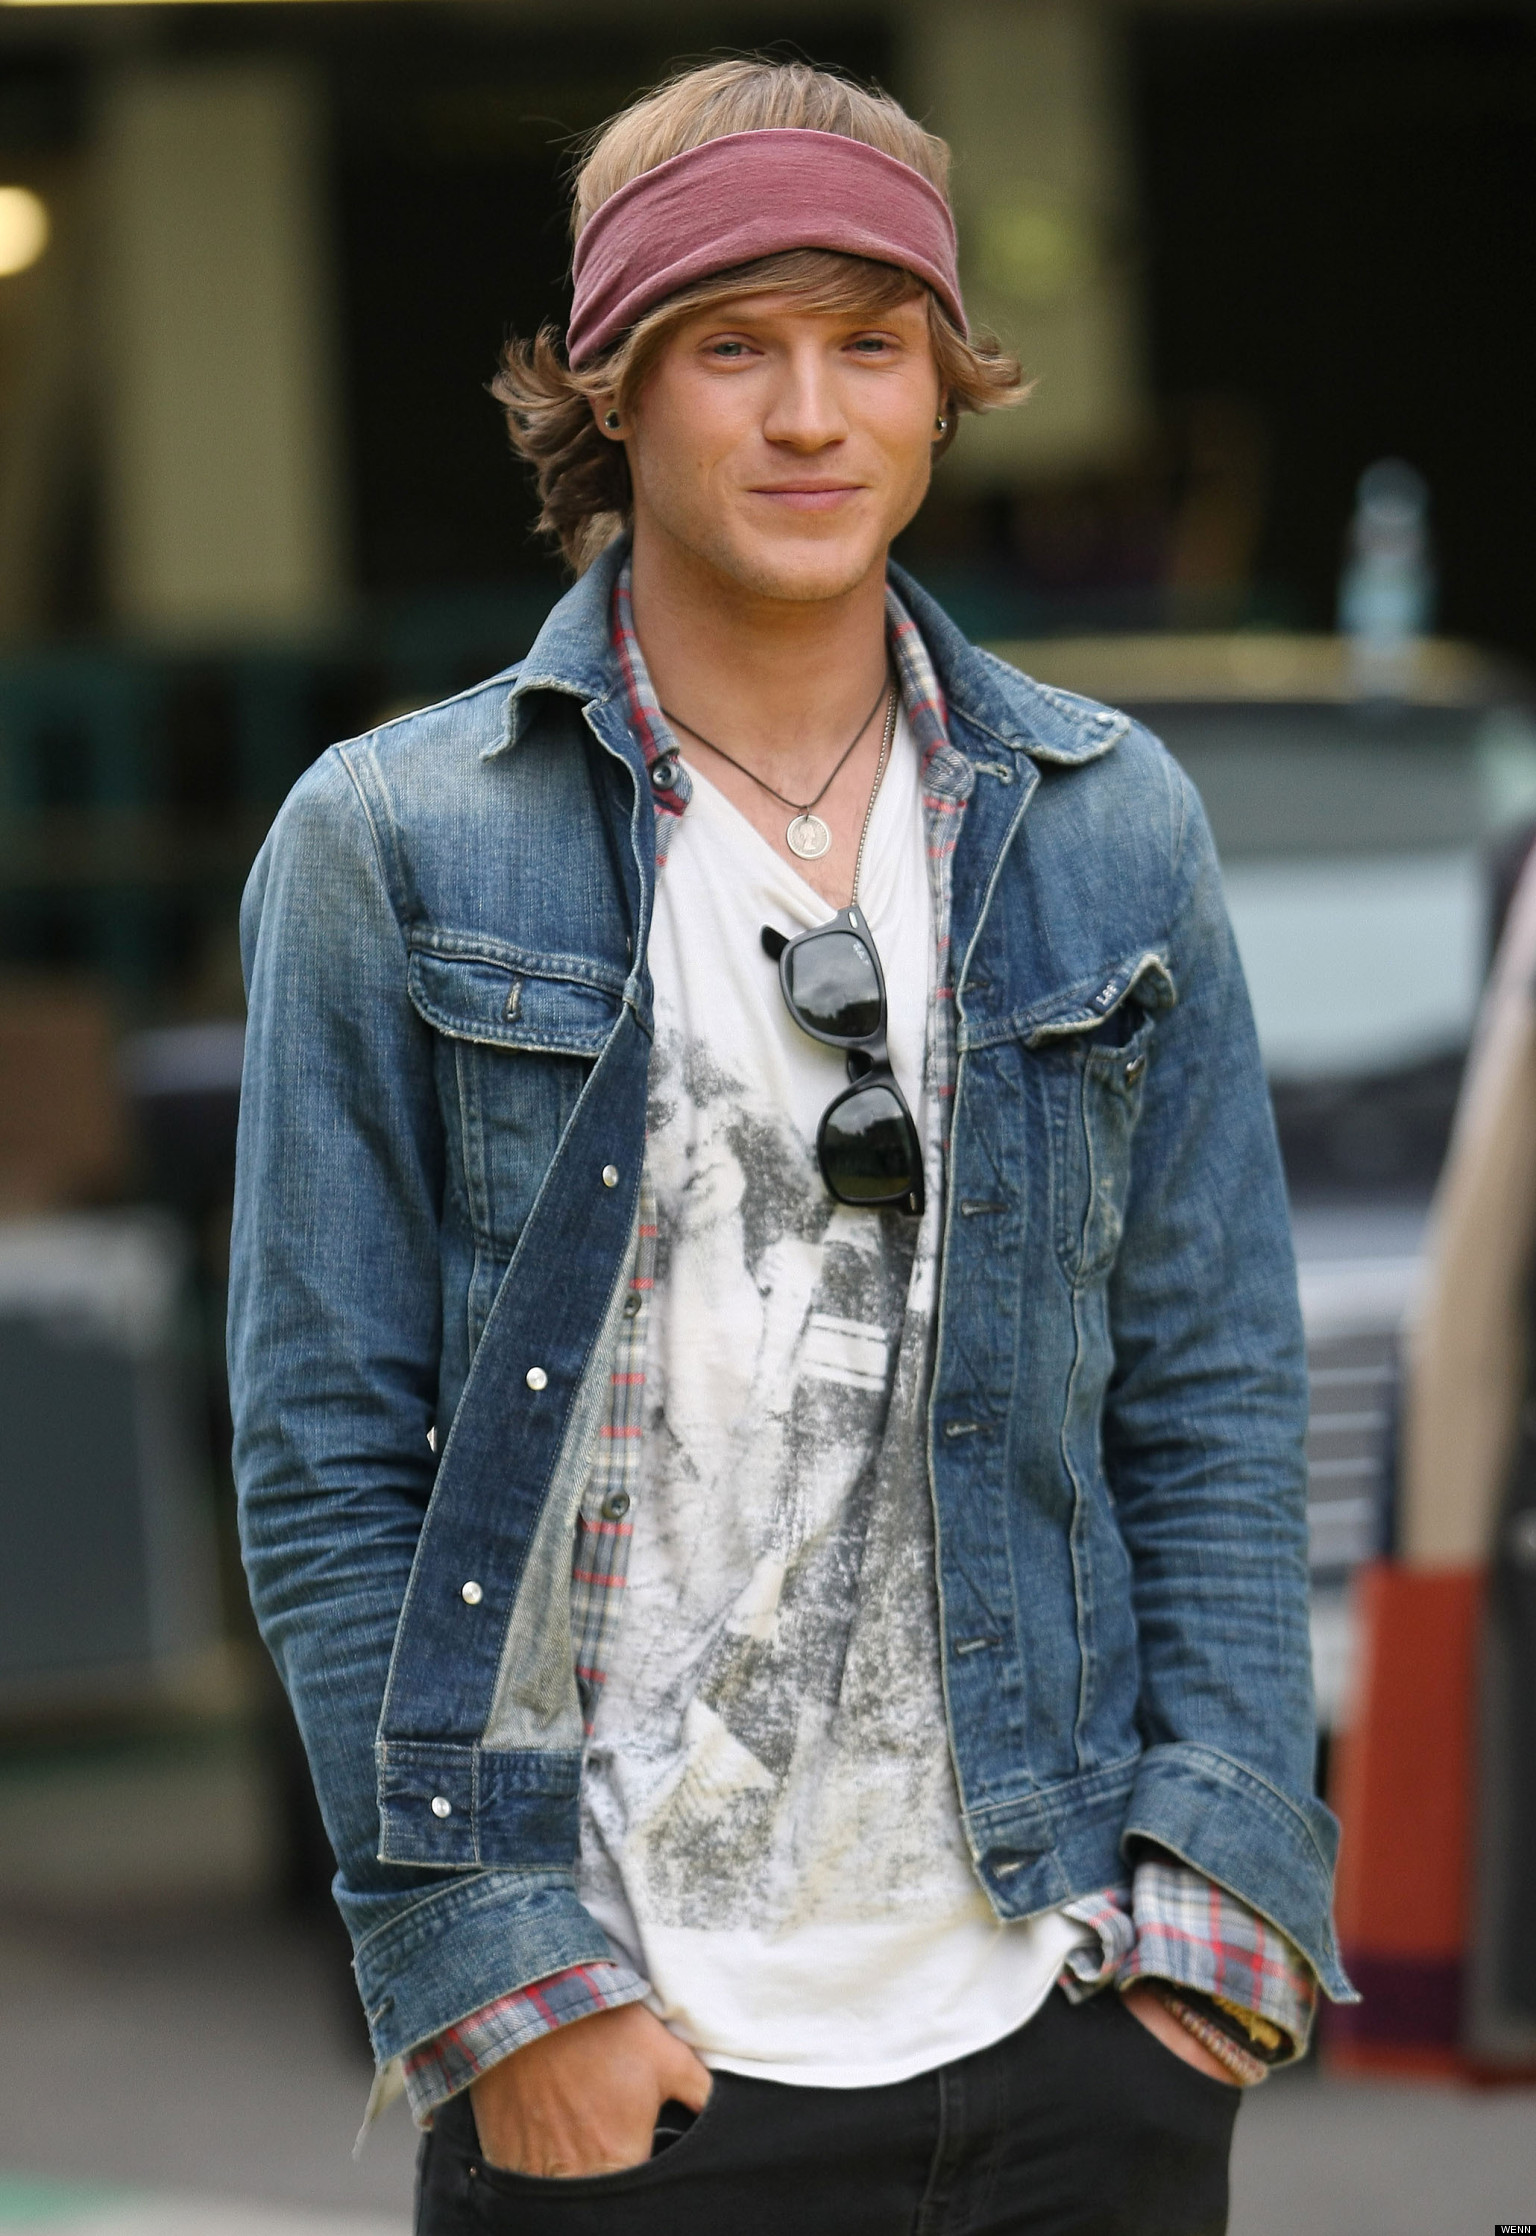 McFly's Dougie Poynter Opens Up About Suicide Bid1536 x 2236